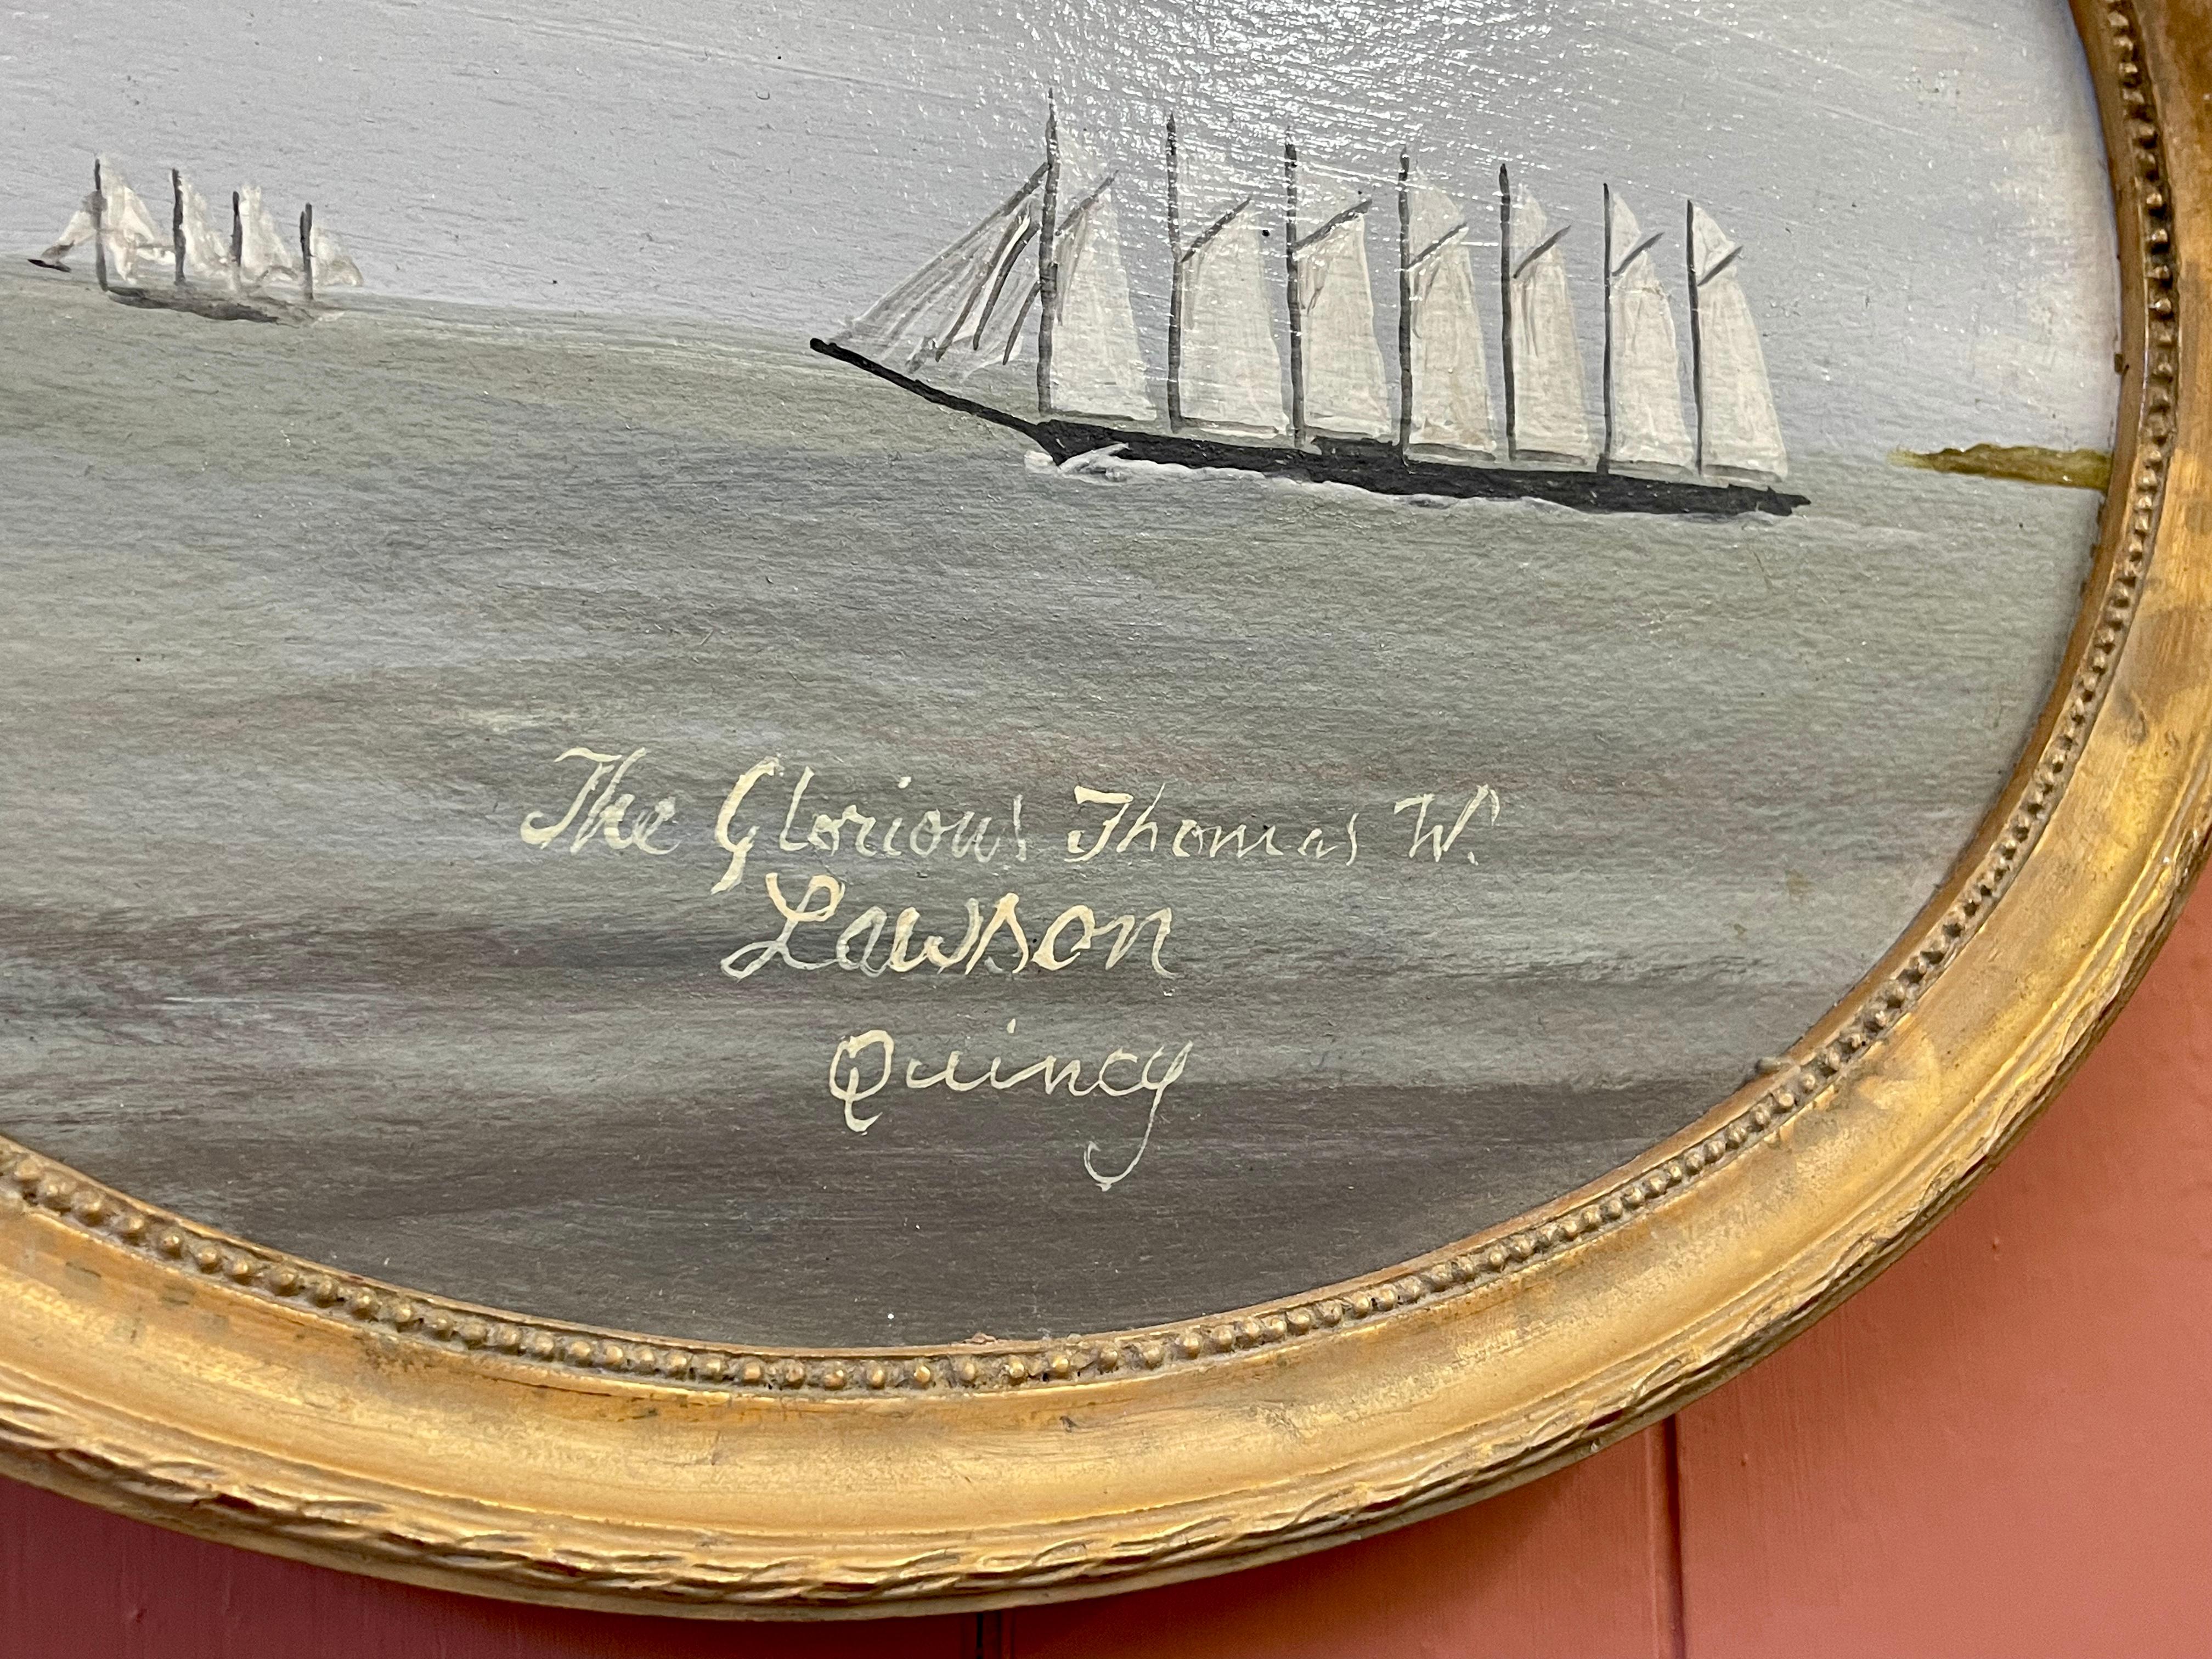 American Oval Seascape Ship Painting of the 